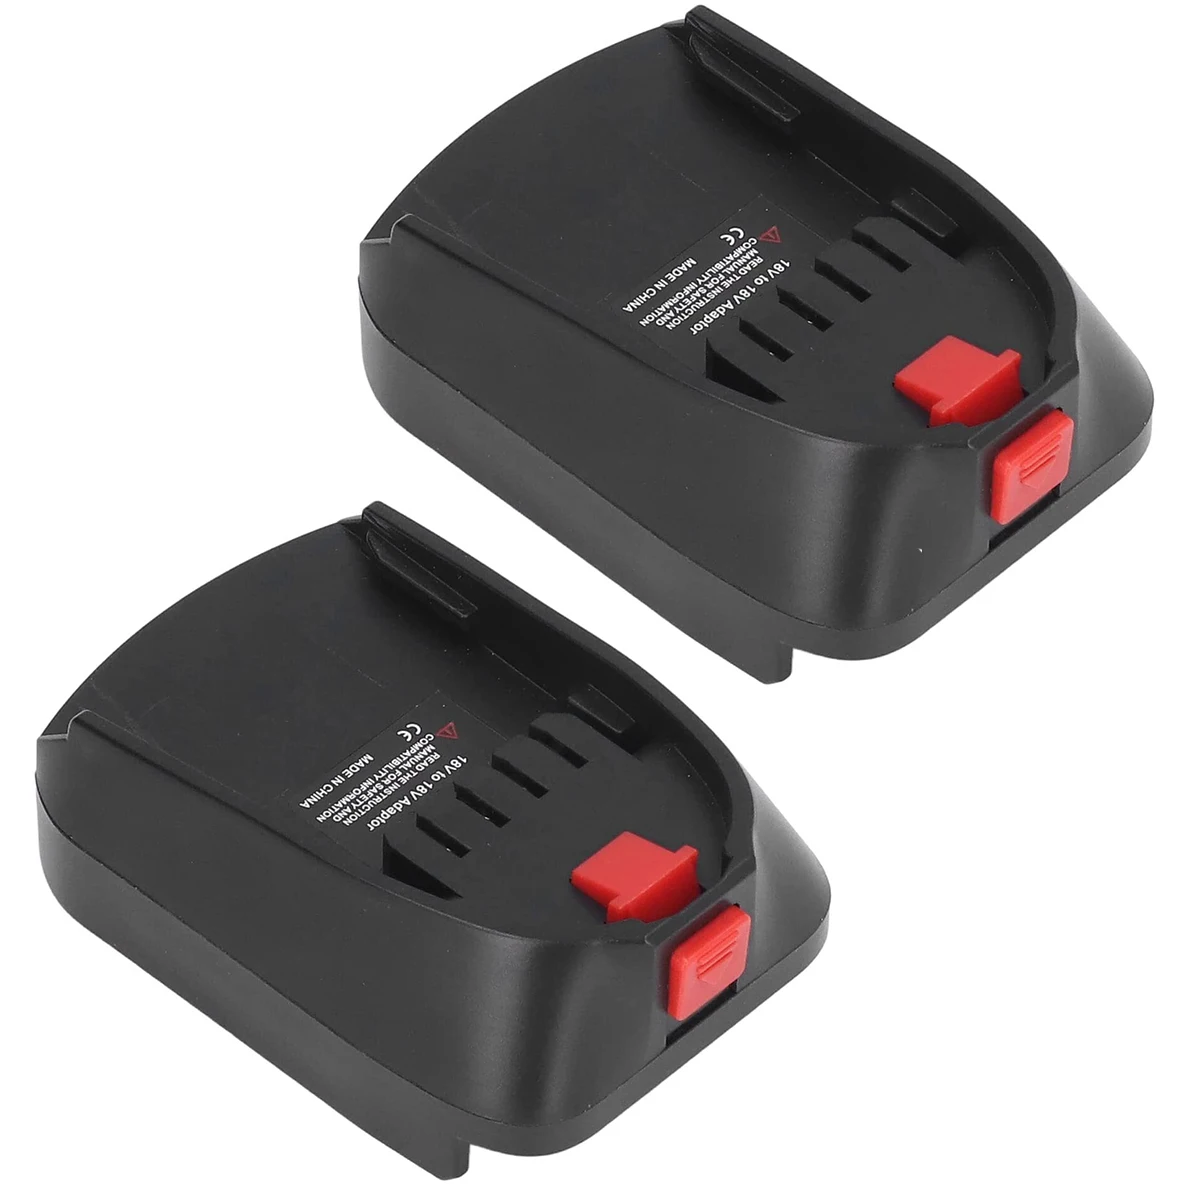 New 2Pieces 18V 3.0Ah Lithium-Ion Battery Pack Akku for Green Bosch Home  and Garden 18V System Bosch Unlimited Vacuum Cleaners - AliExpress